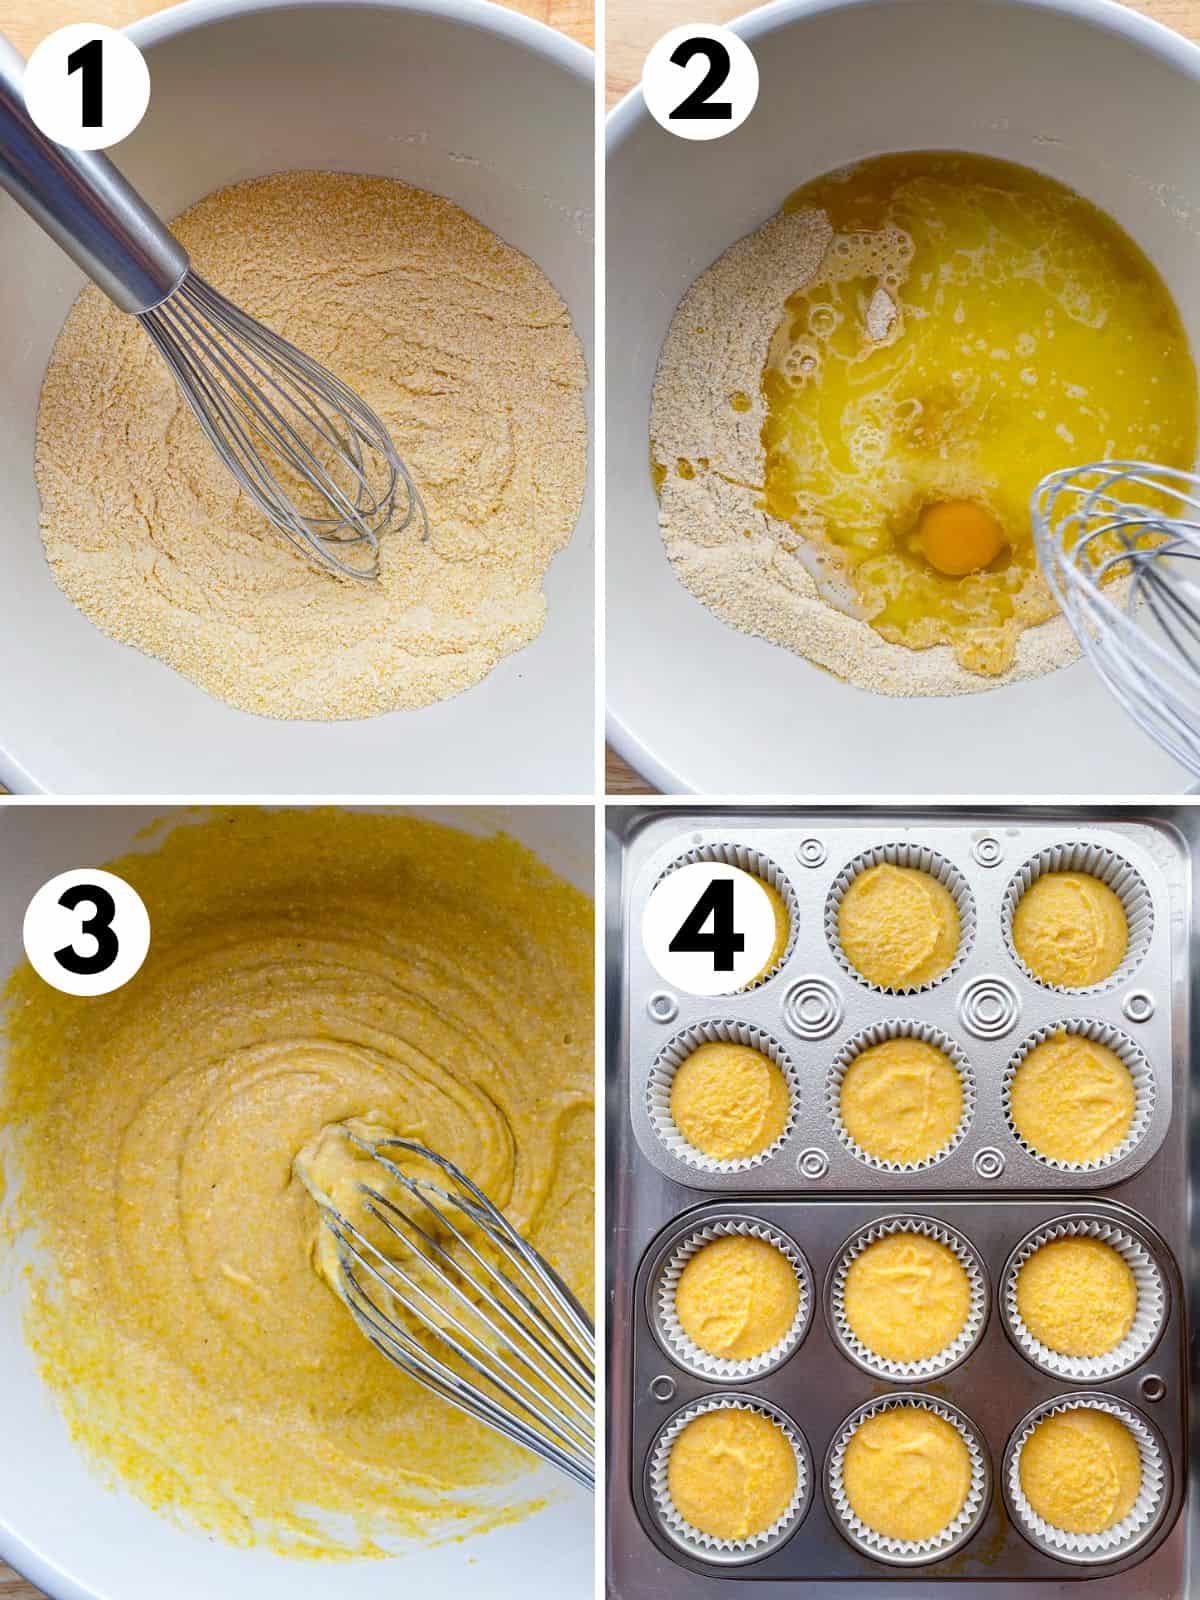 The steps for making corn muffins. 1. Dry ingredients are whisked in a large bowl. 2. The eggs, melted butter, and milk are added. 3. The batter is mixed with a whisk. 4. Batter is in paper-lined muffin pans.